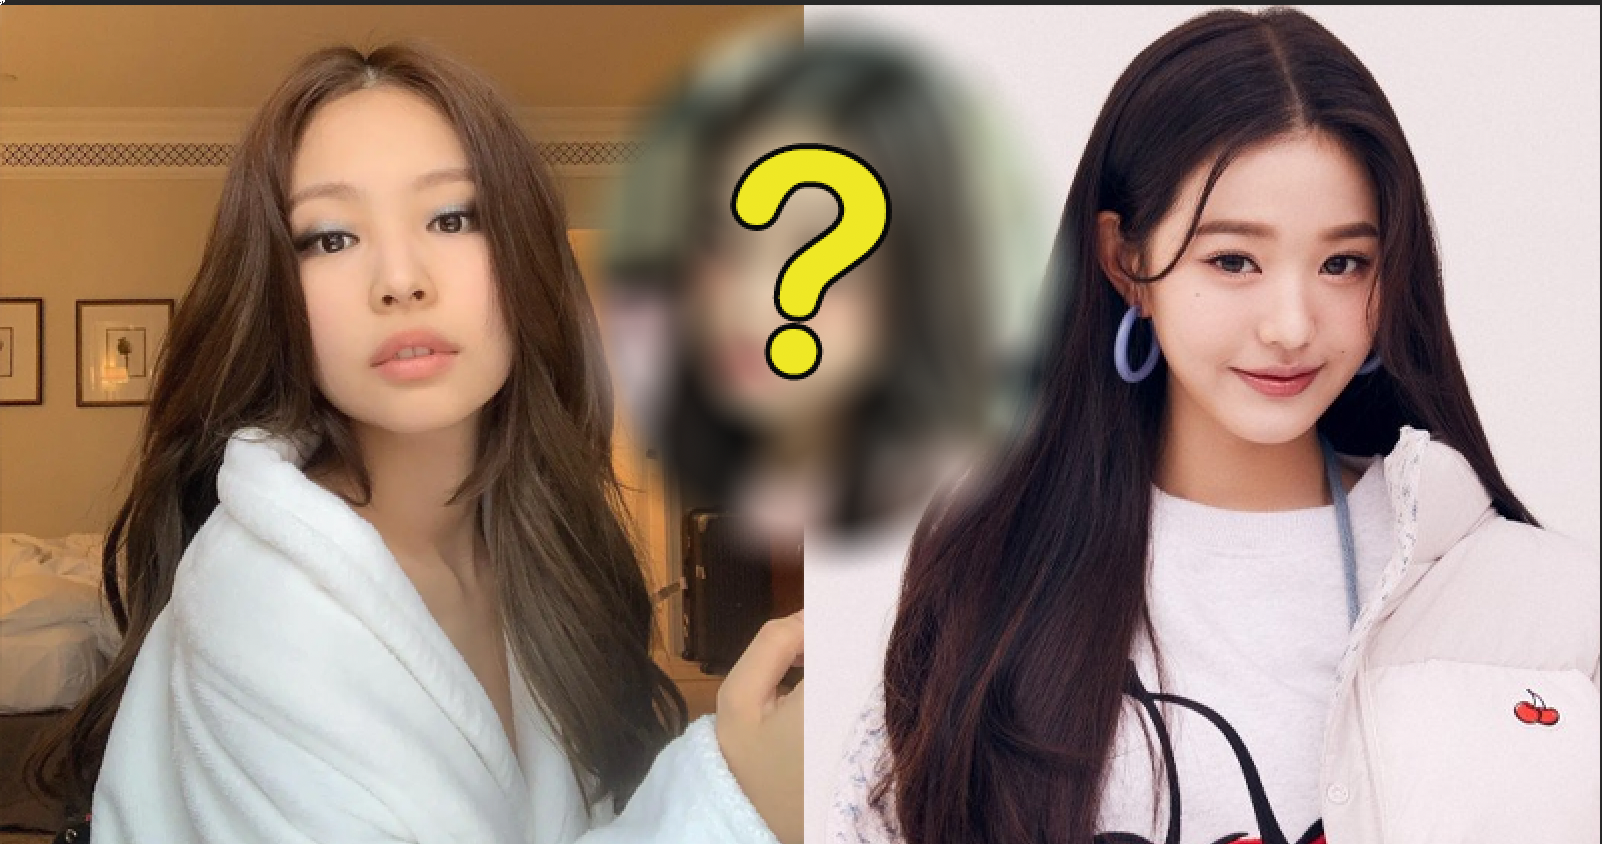 Contestant of “Singles Inferno”Goes Viral For Her Resemblance To BLACKPINK’s Jennie And IVE’s Wonyoung